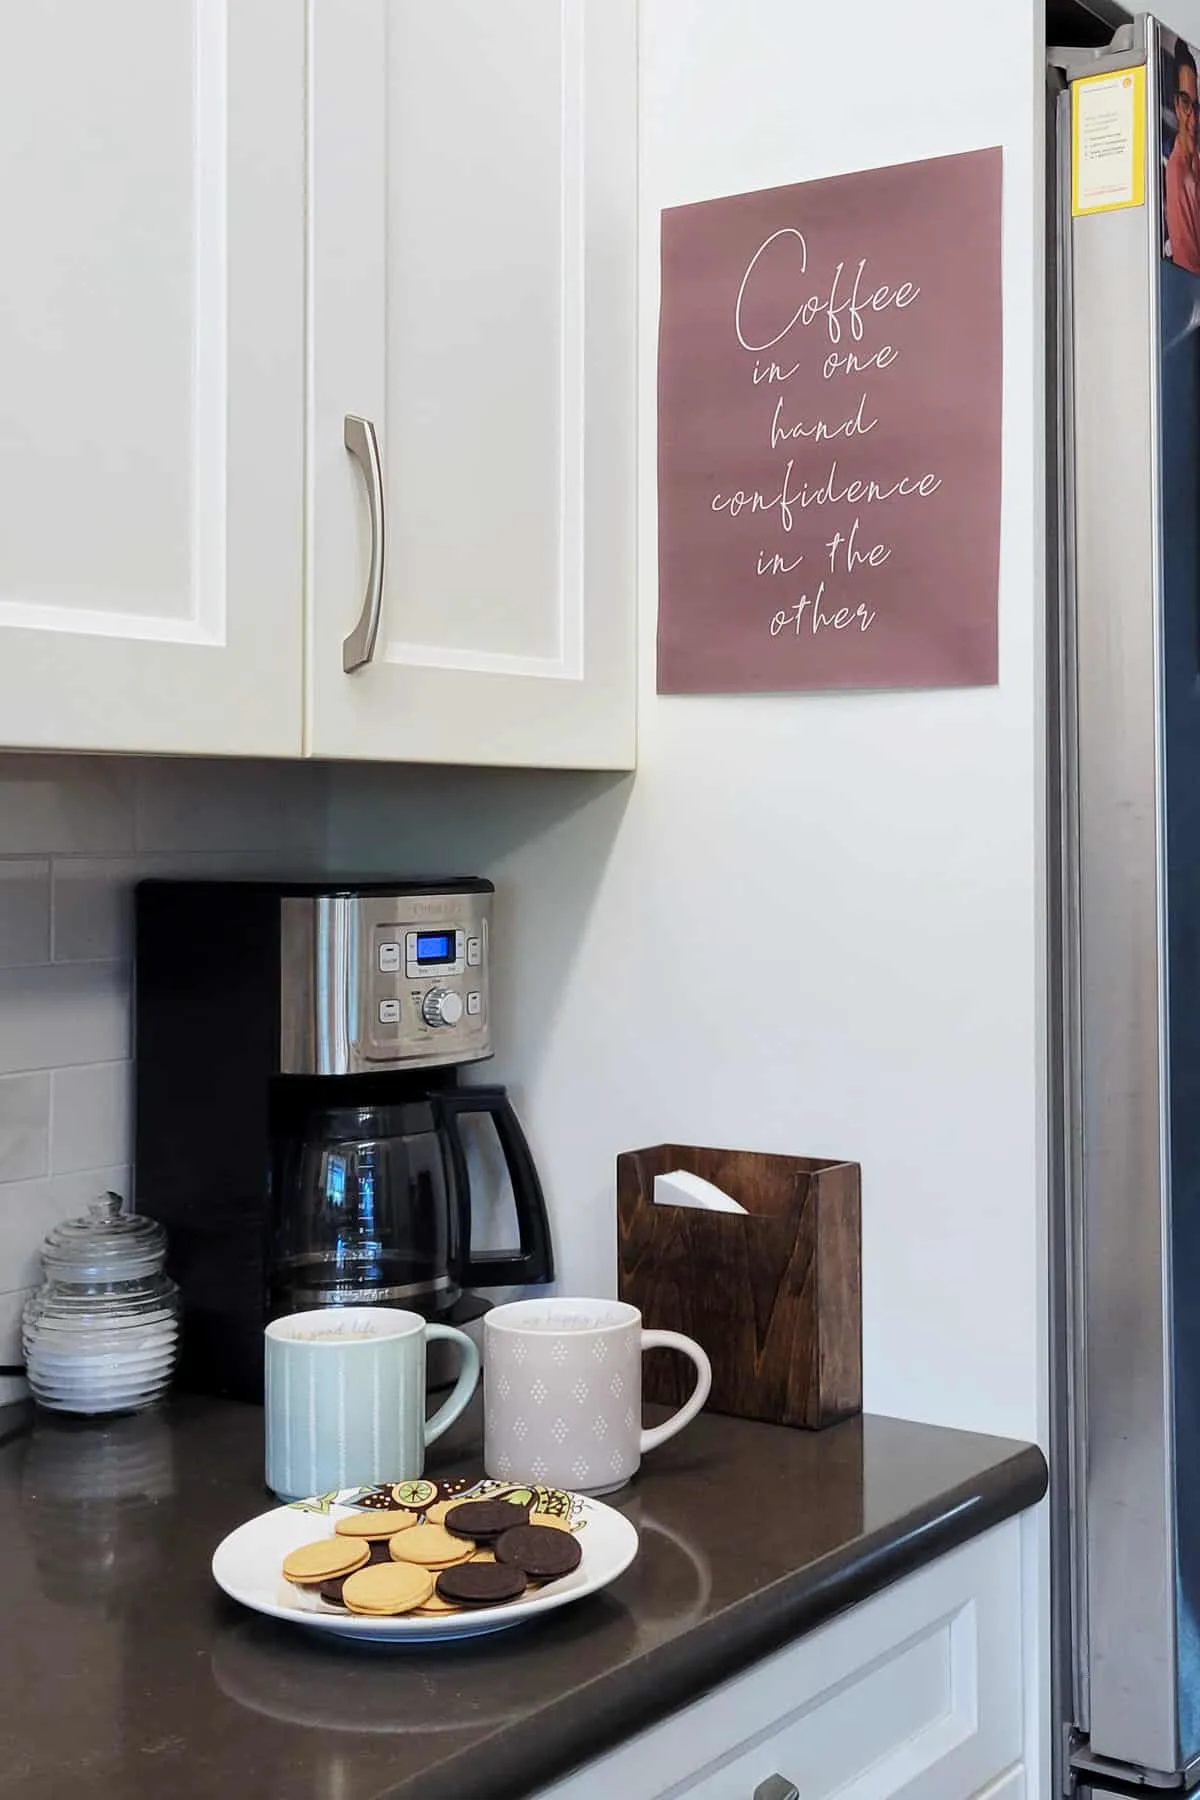 Coffee station in kitchen with a coffee poster on the wall.